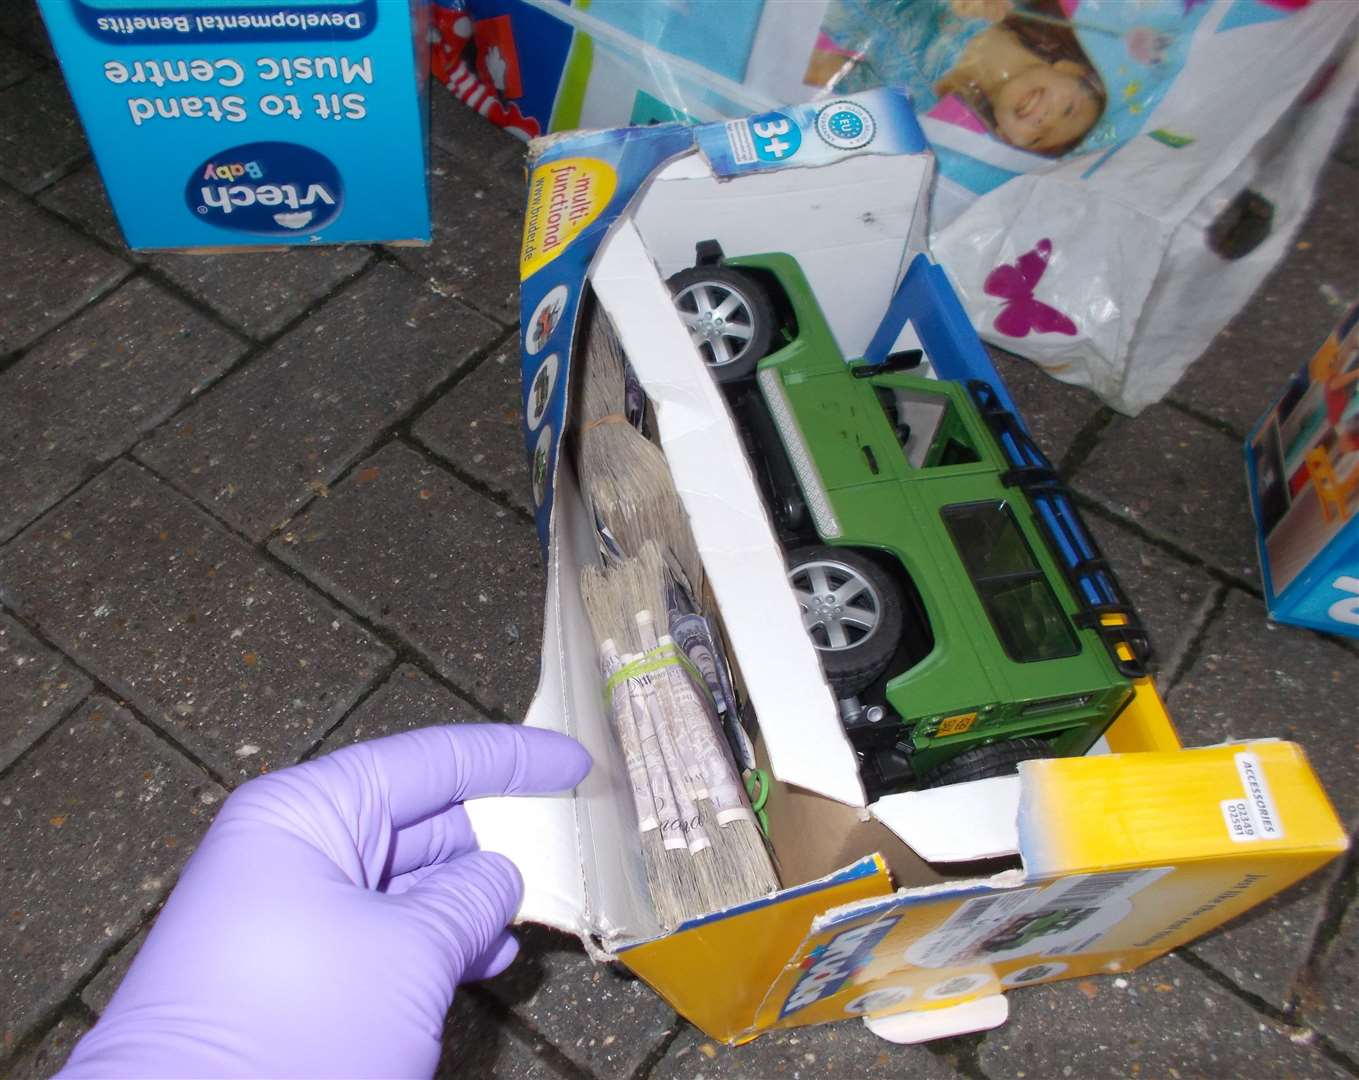 Cash hidden within the toy packaged found in the boot of the car. Picture: Border Force